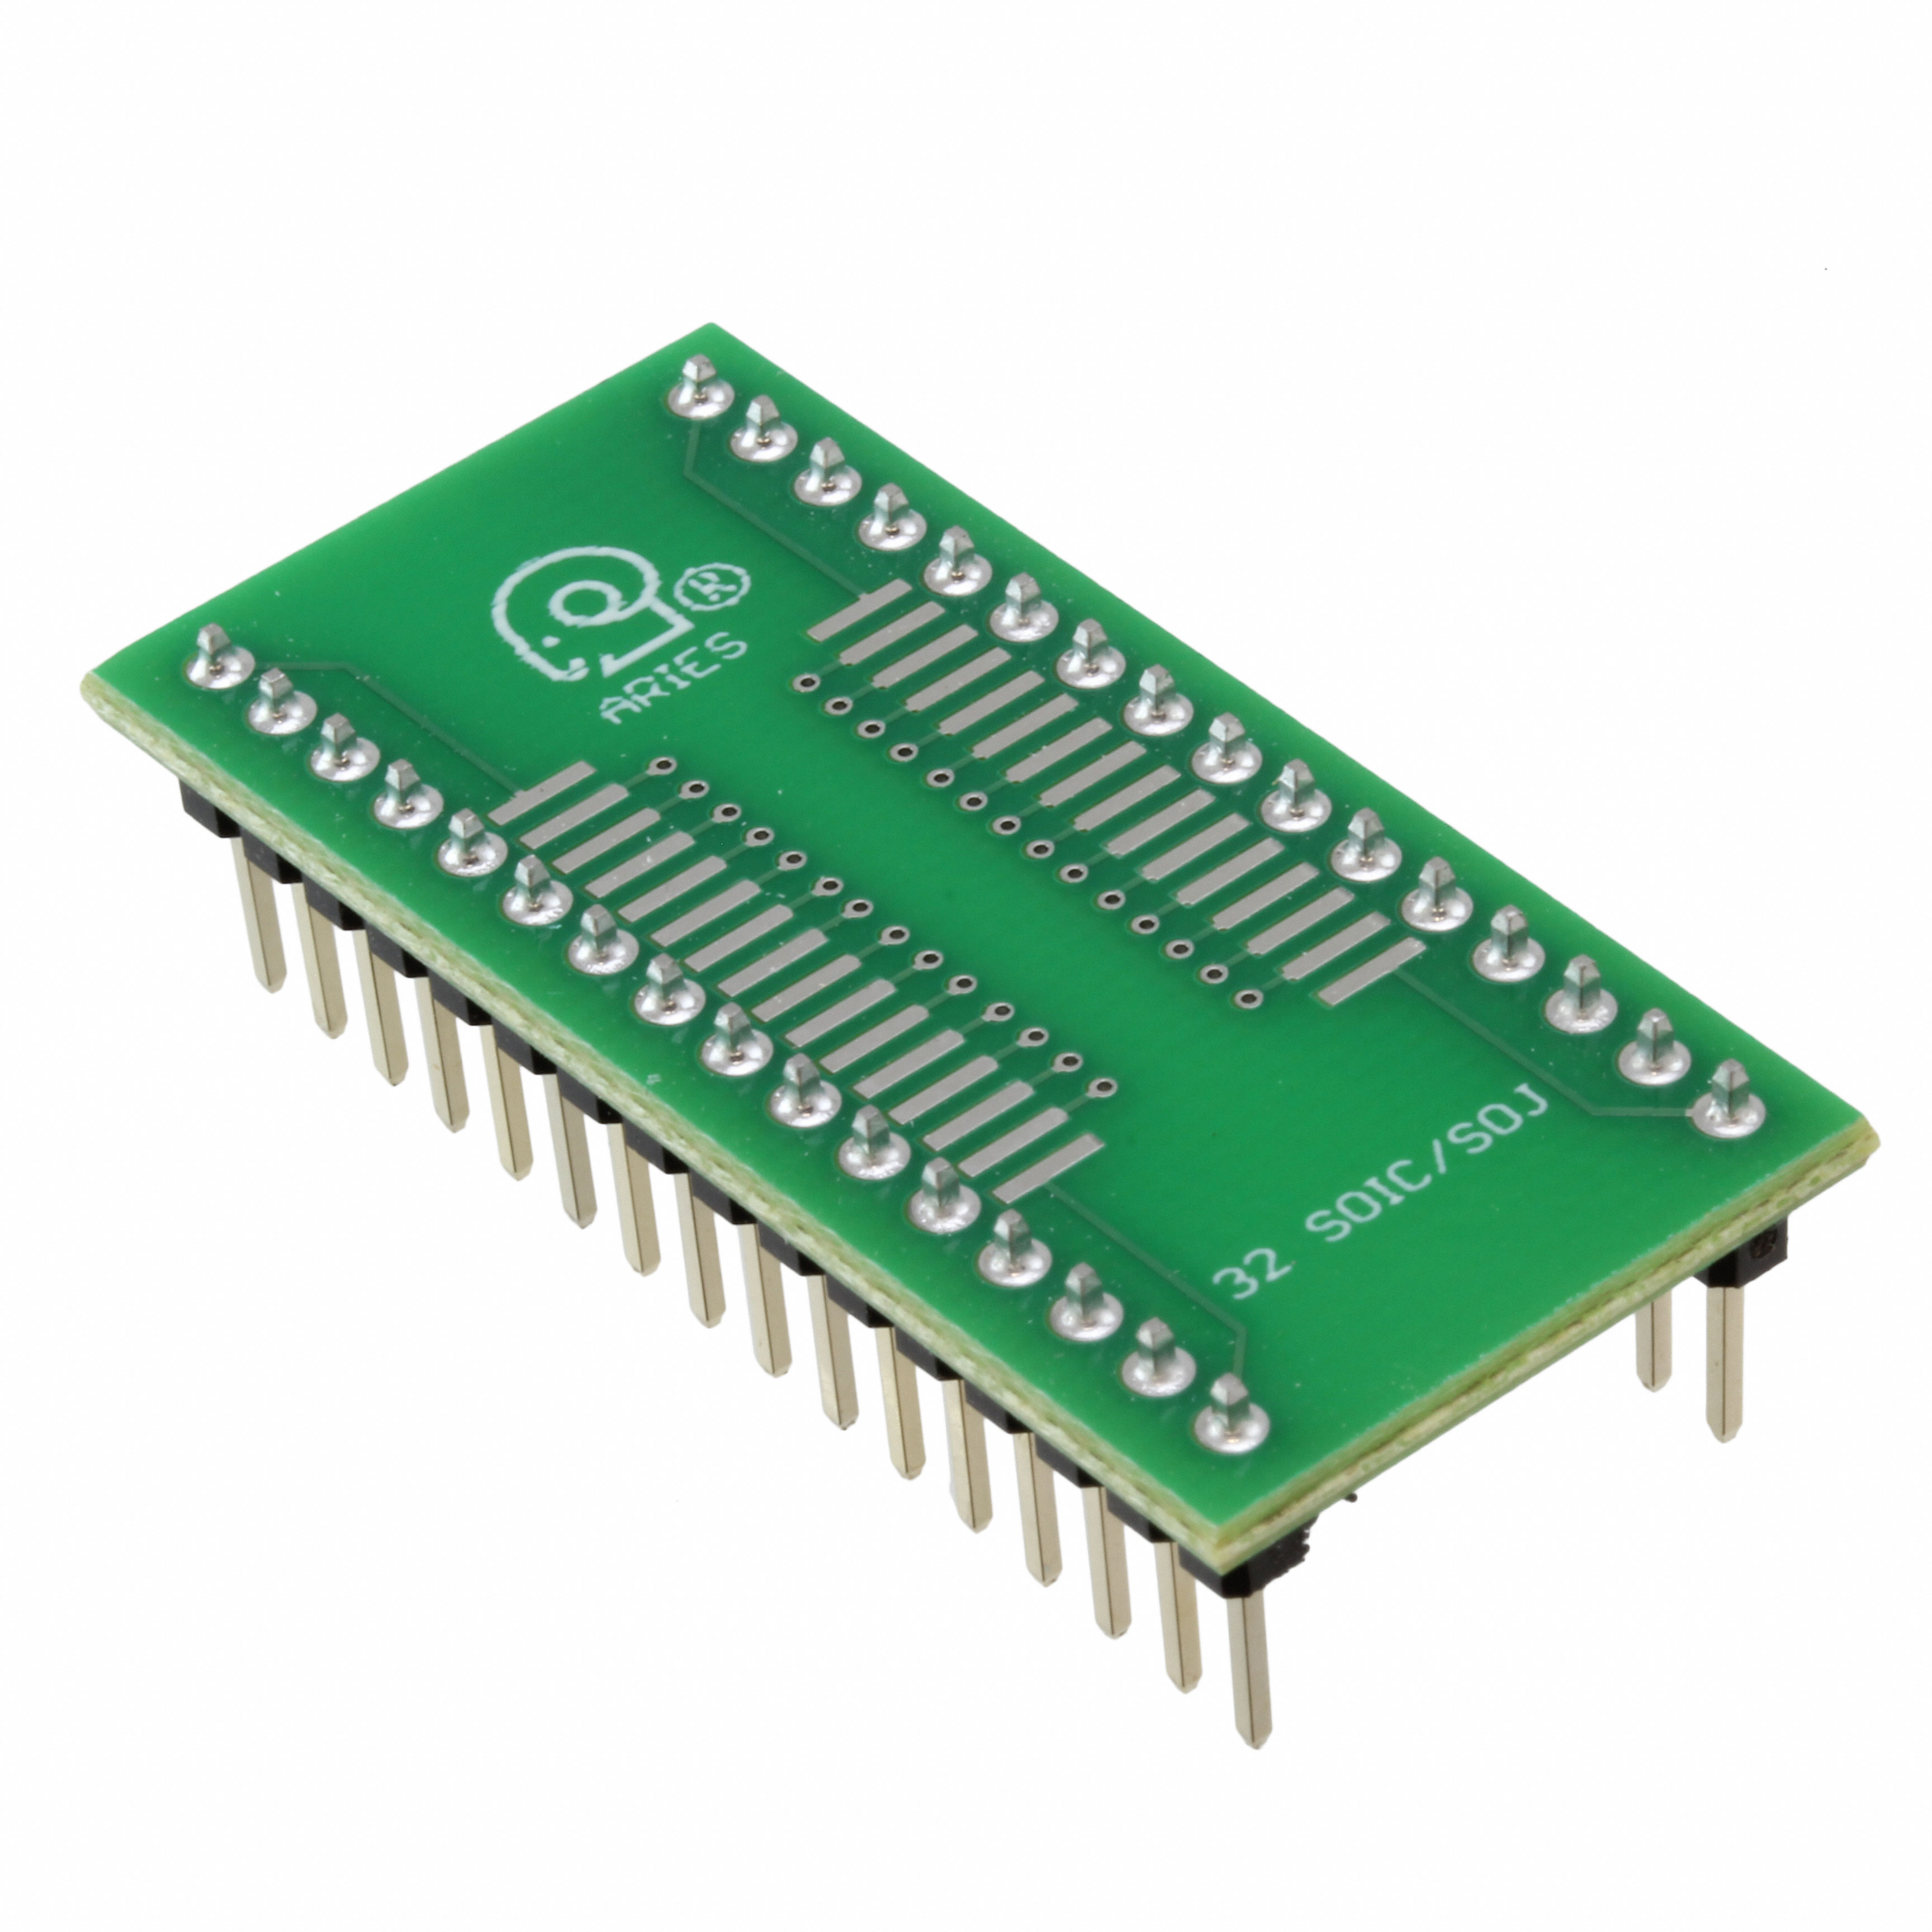 【LCQT-SOIC32W】SOCKET ADAPTER SOIC-W TO 32DIP